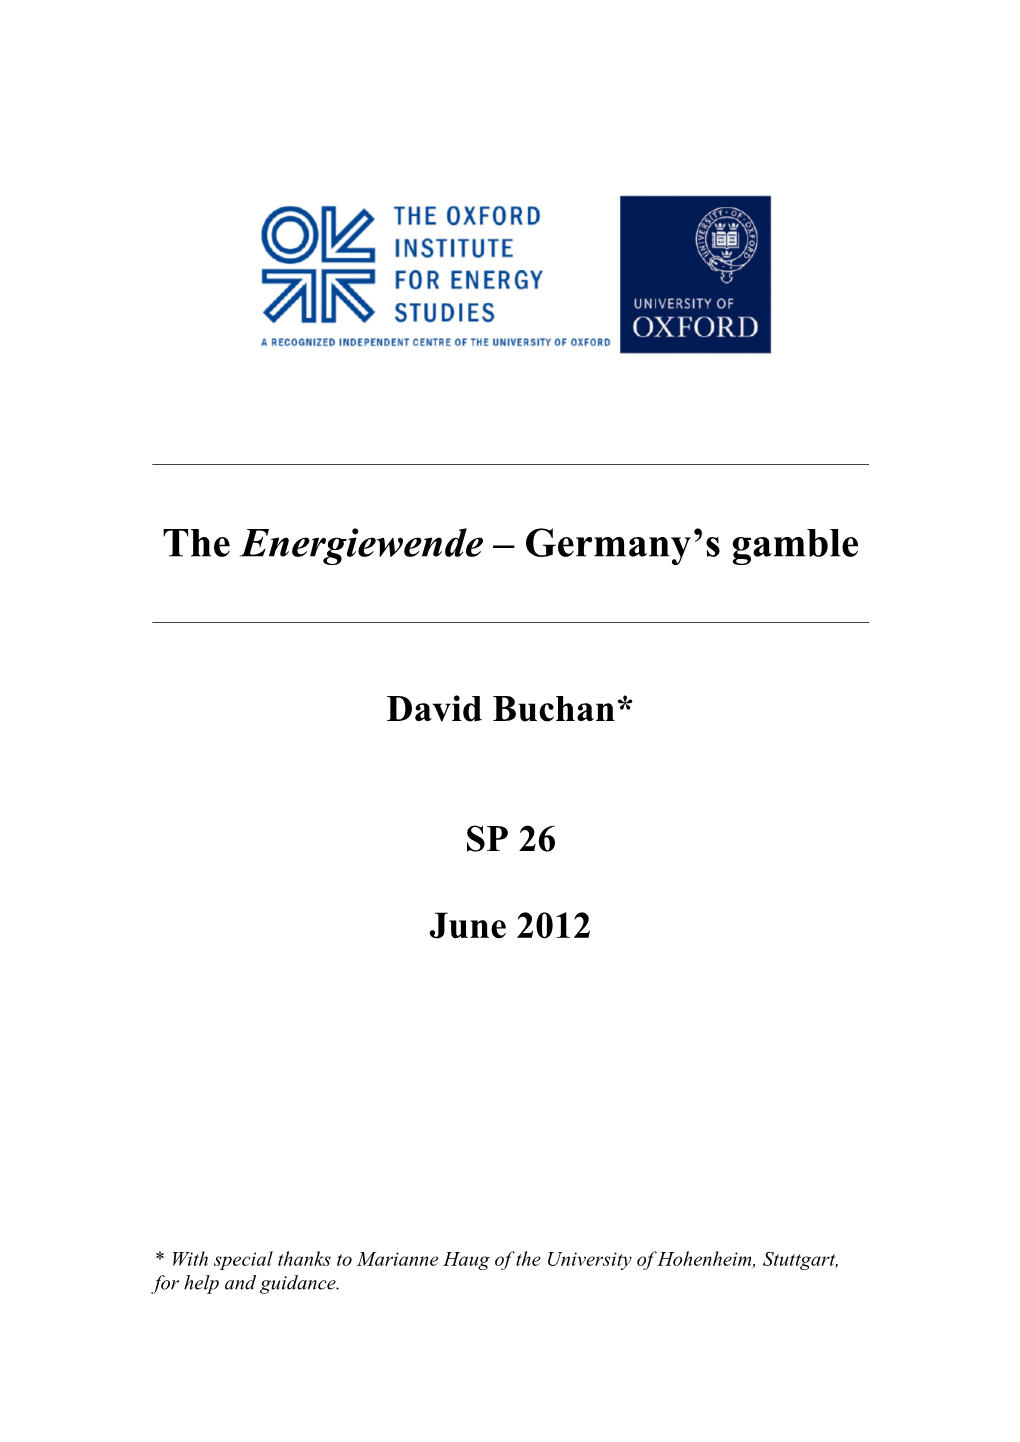 The Energiewende – Germany's Gamble